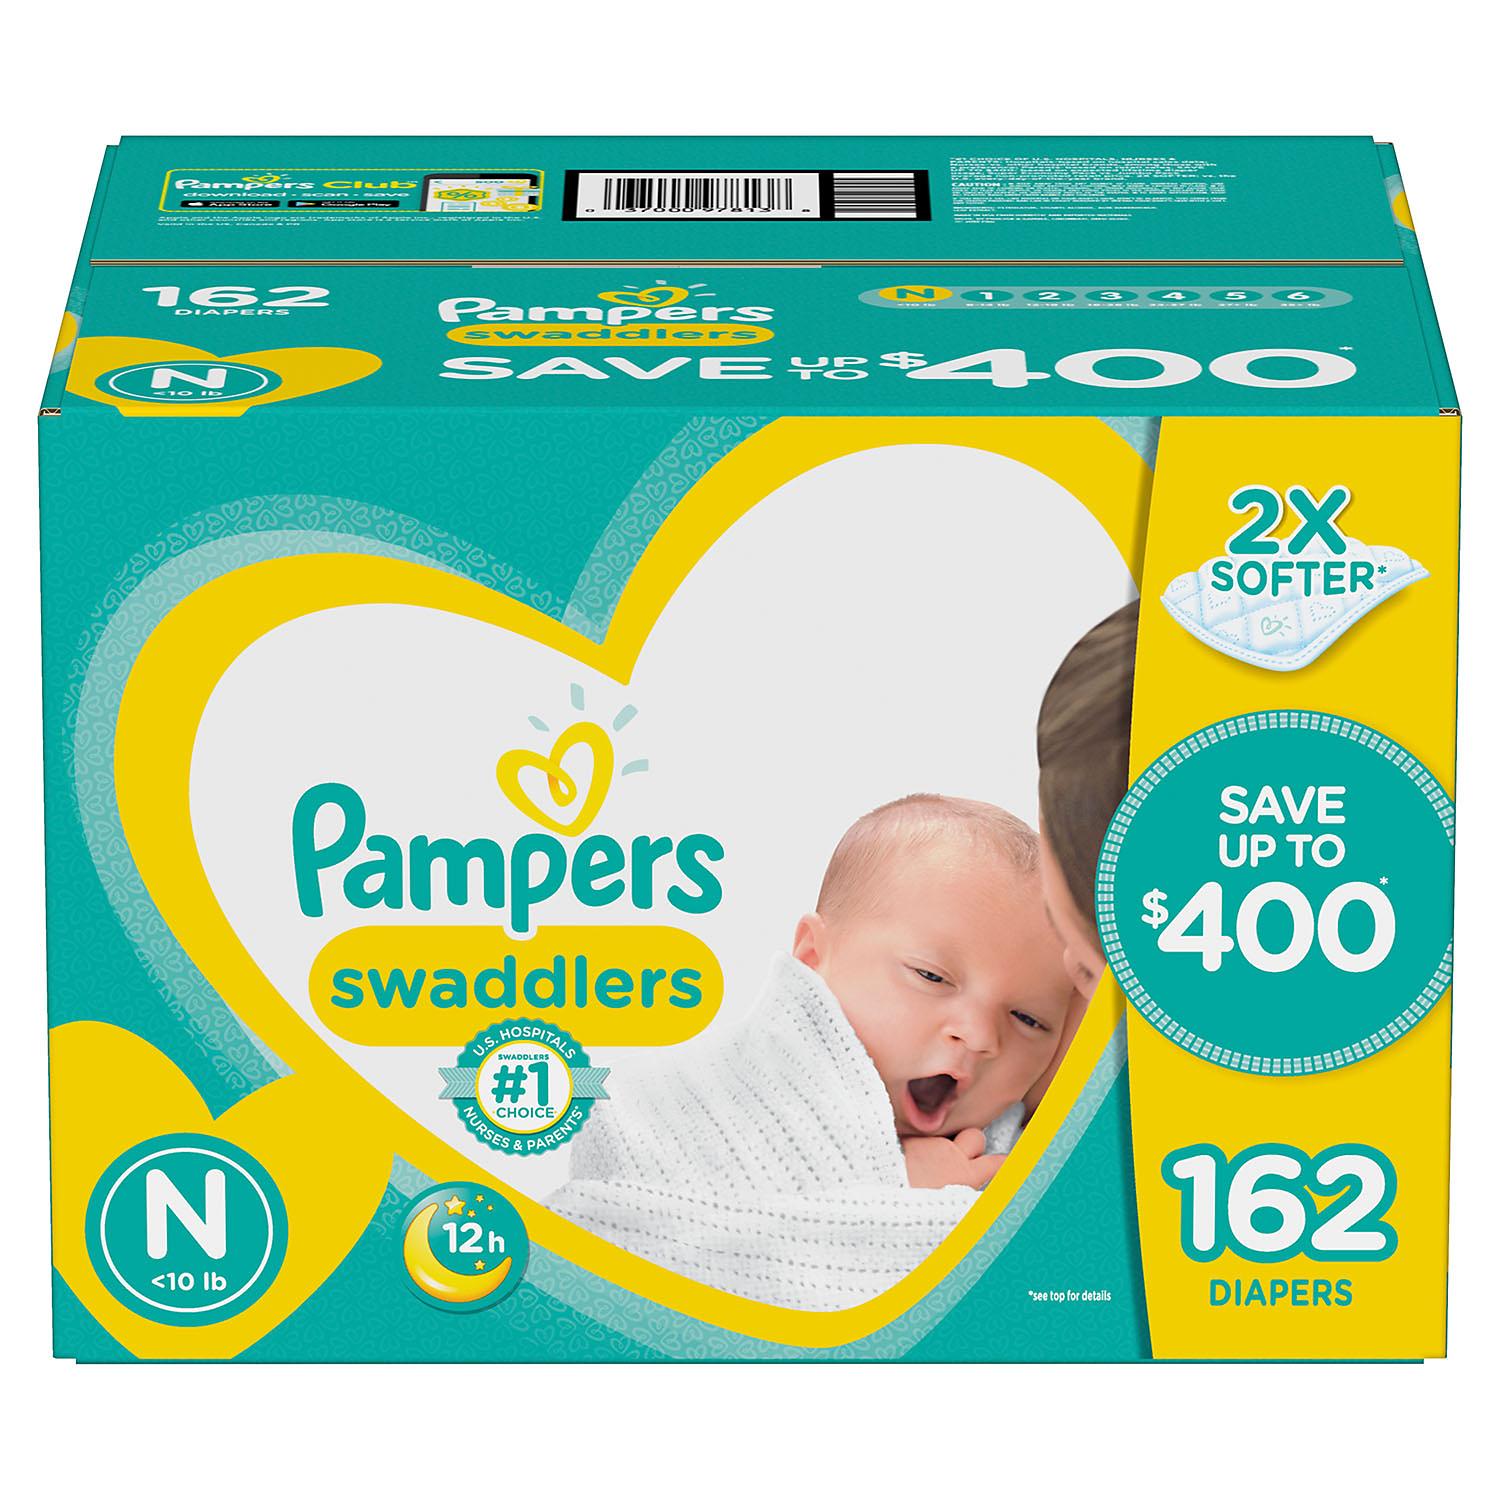 Pampers Swaddlers Diapers - Size 7, 92 ct